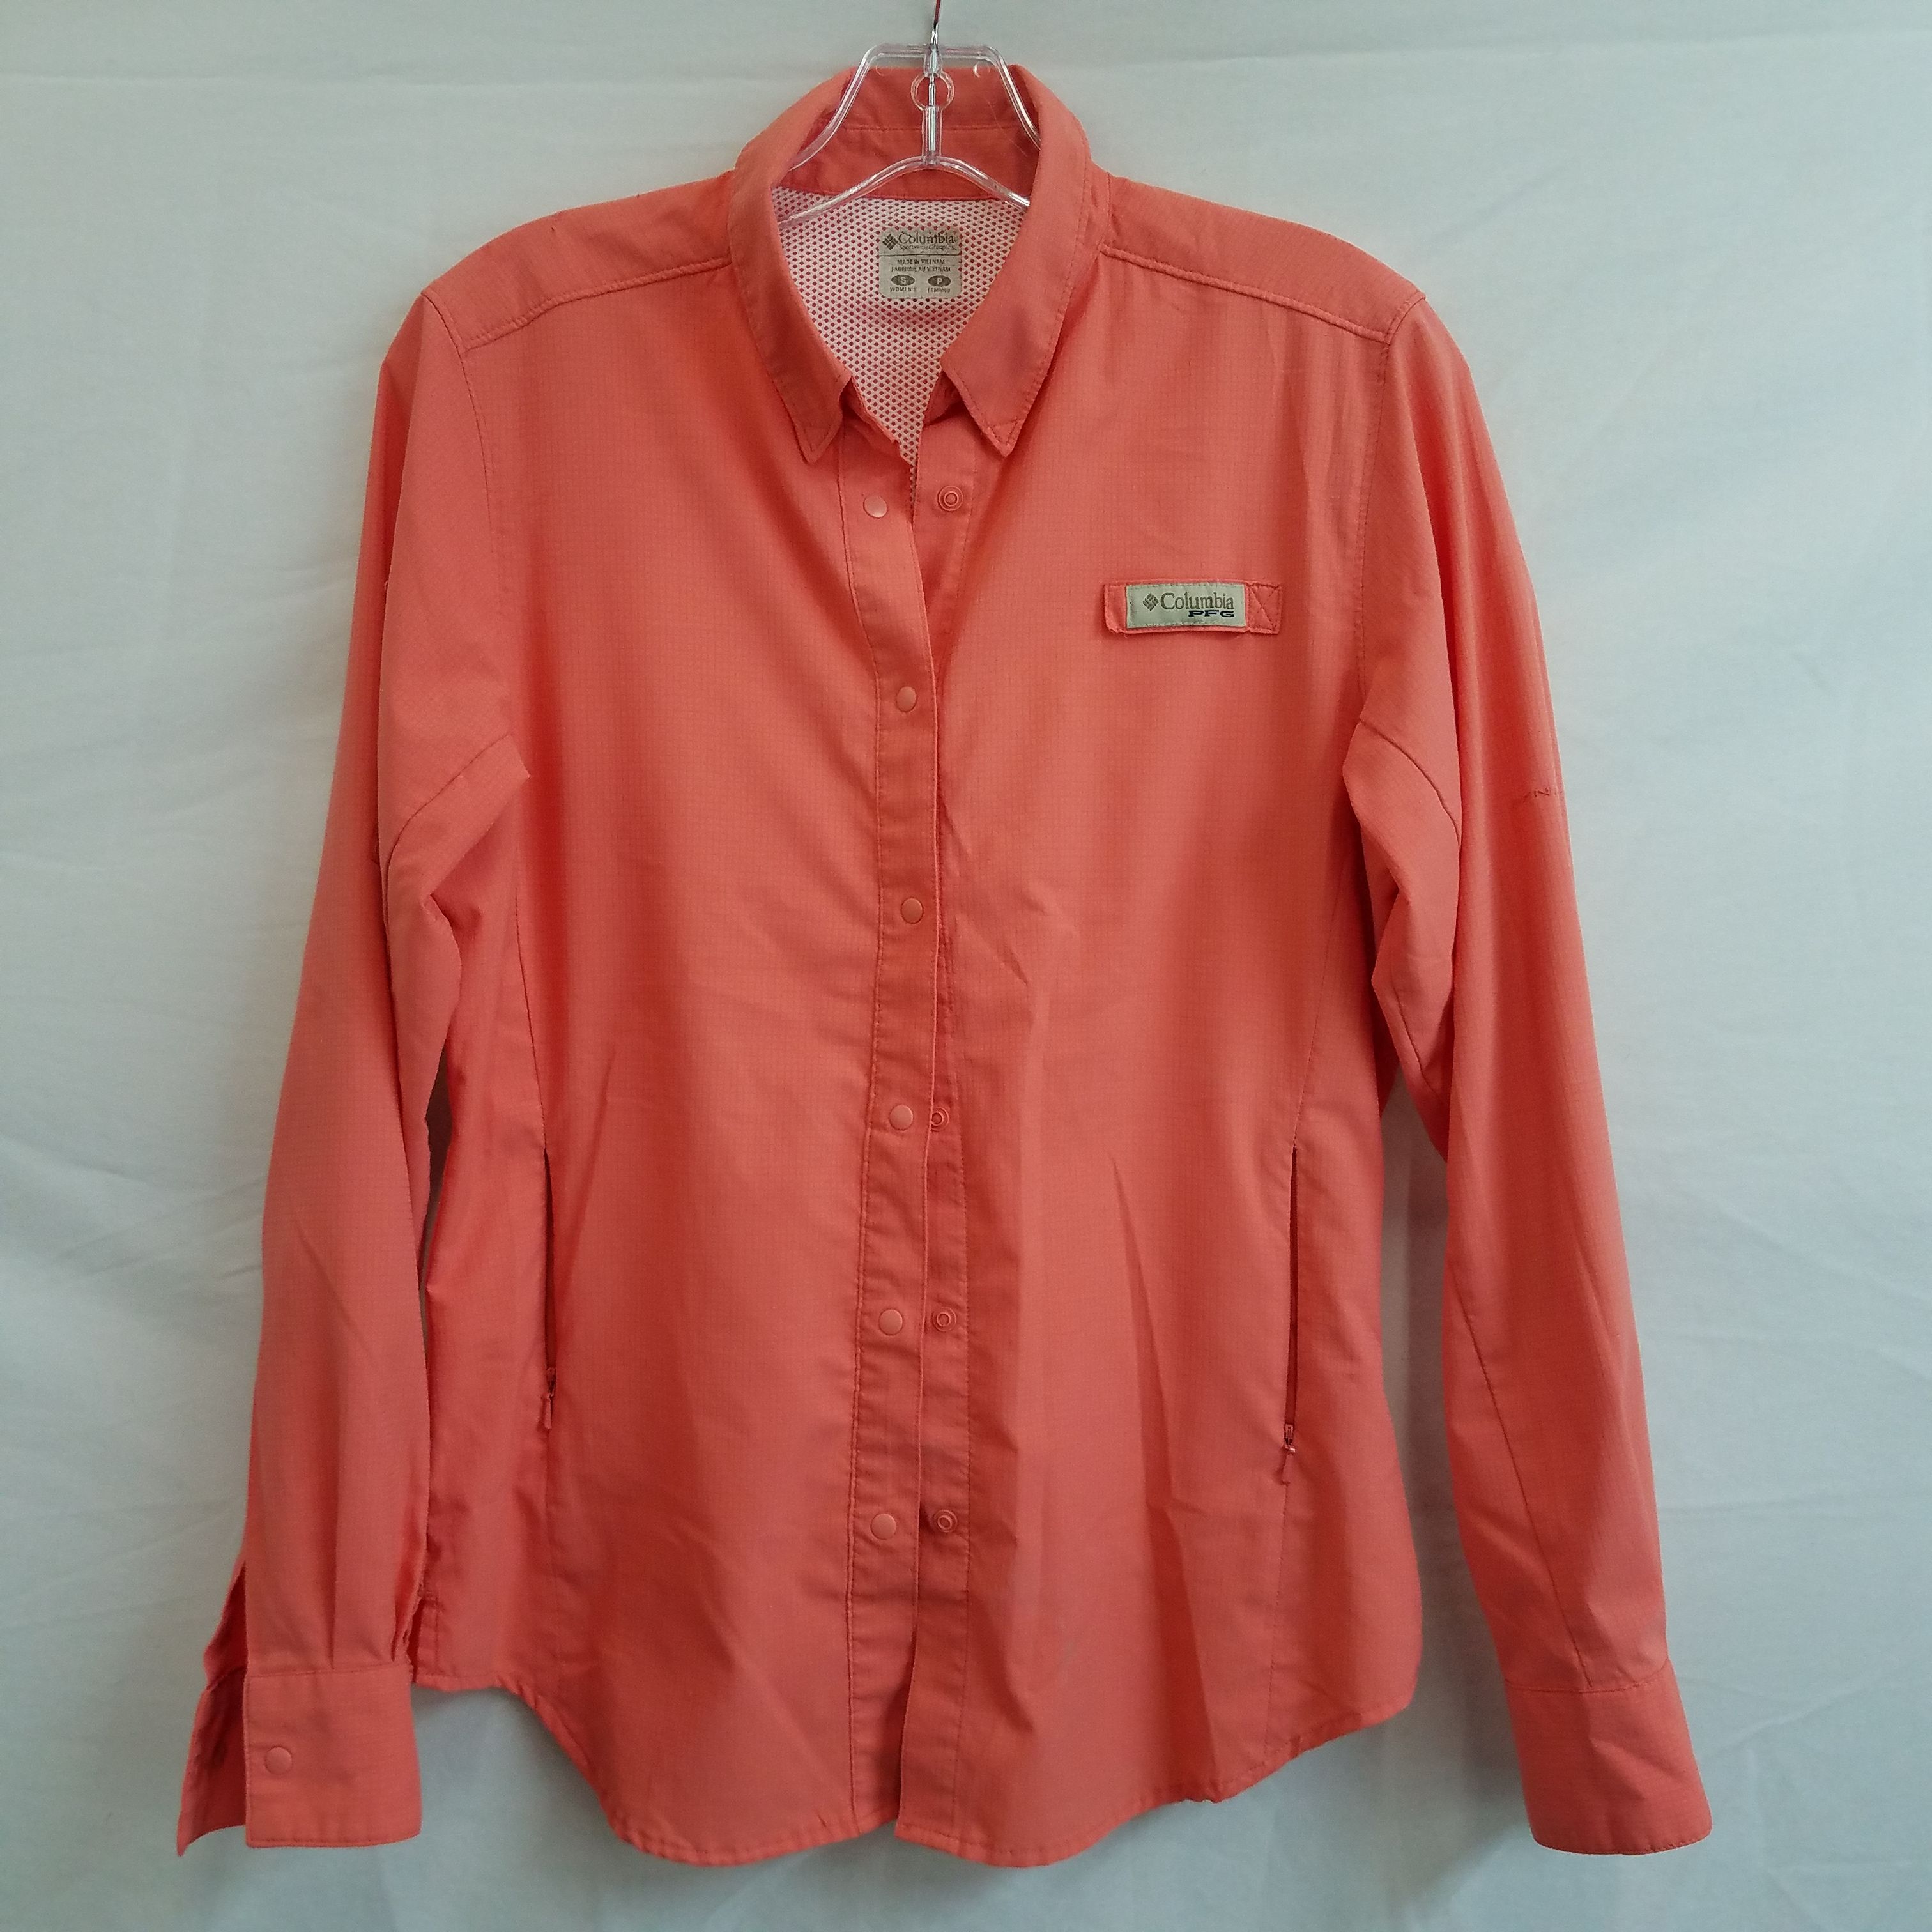 Buy the Columbia salmon pink outdoor button shirt women's S